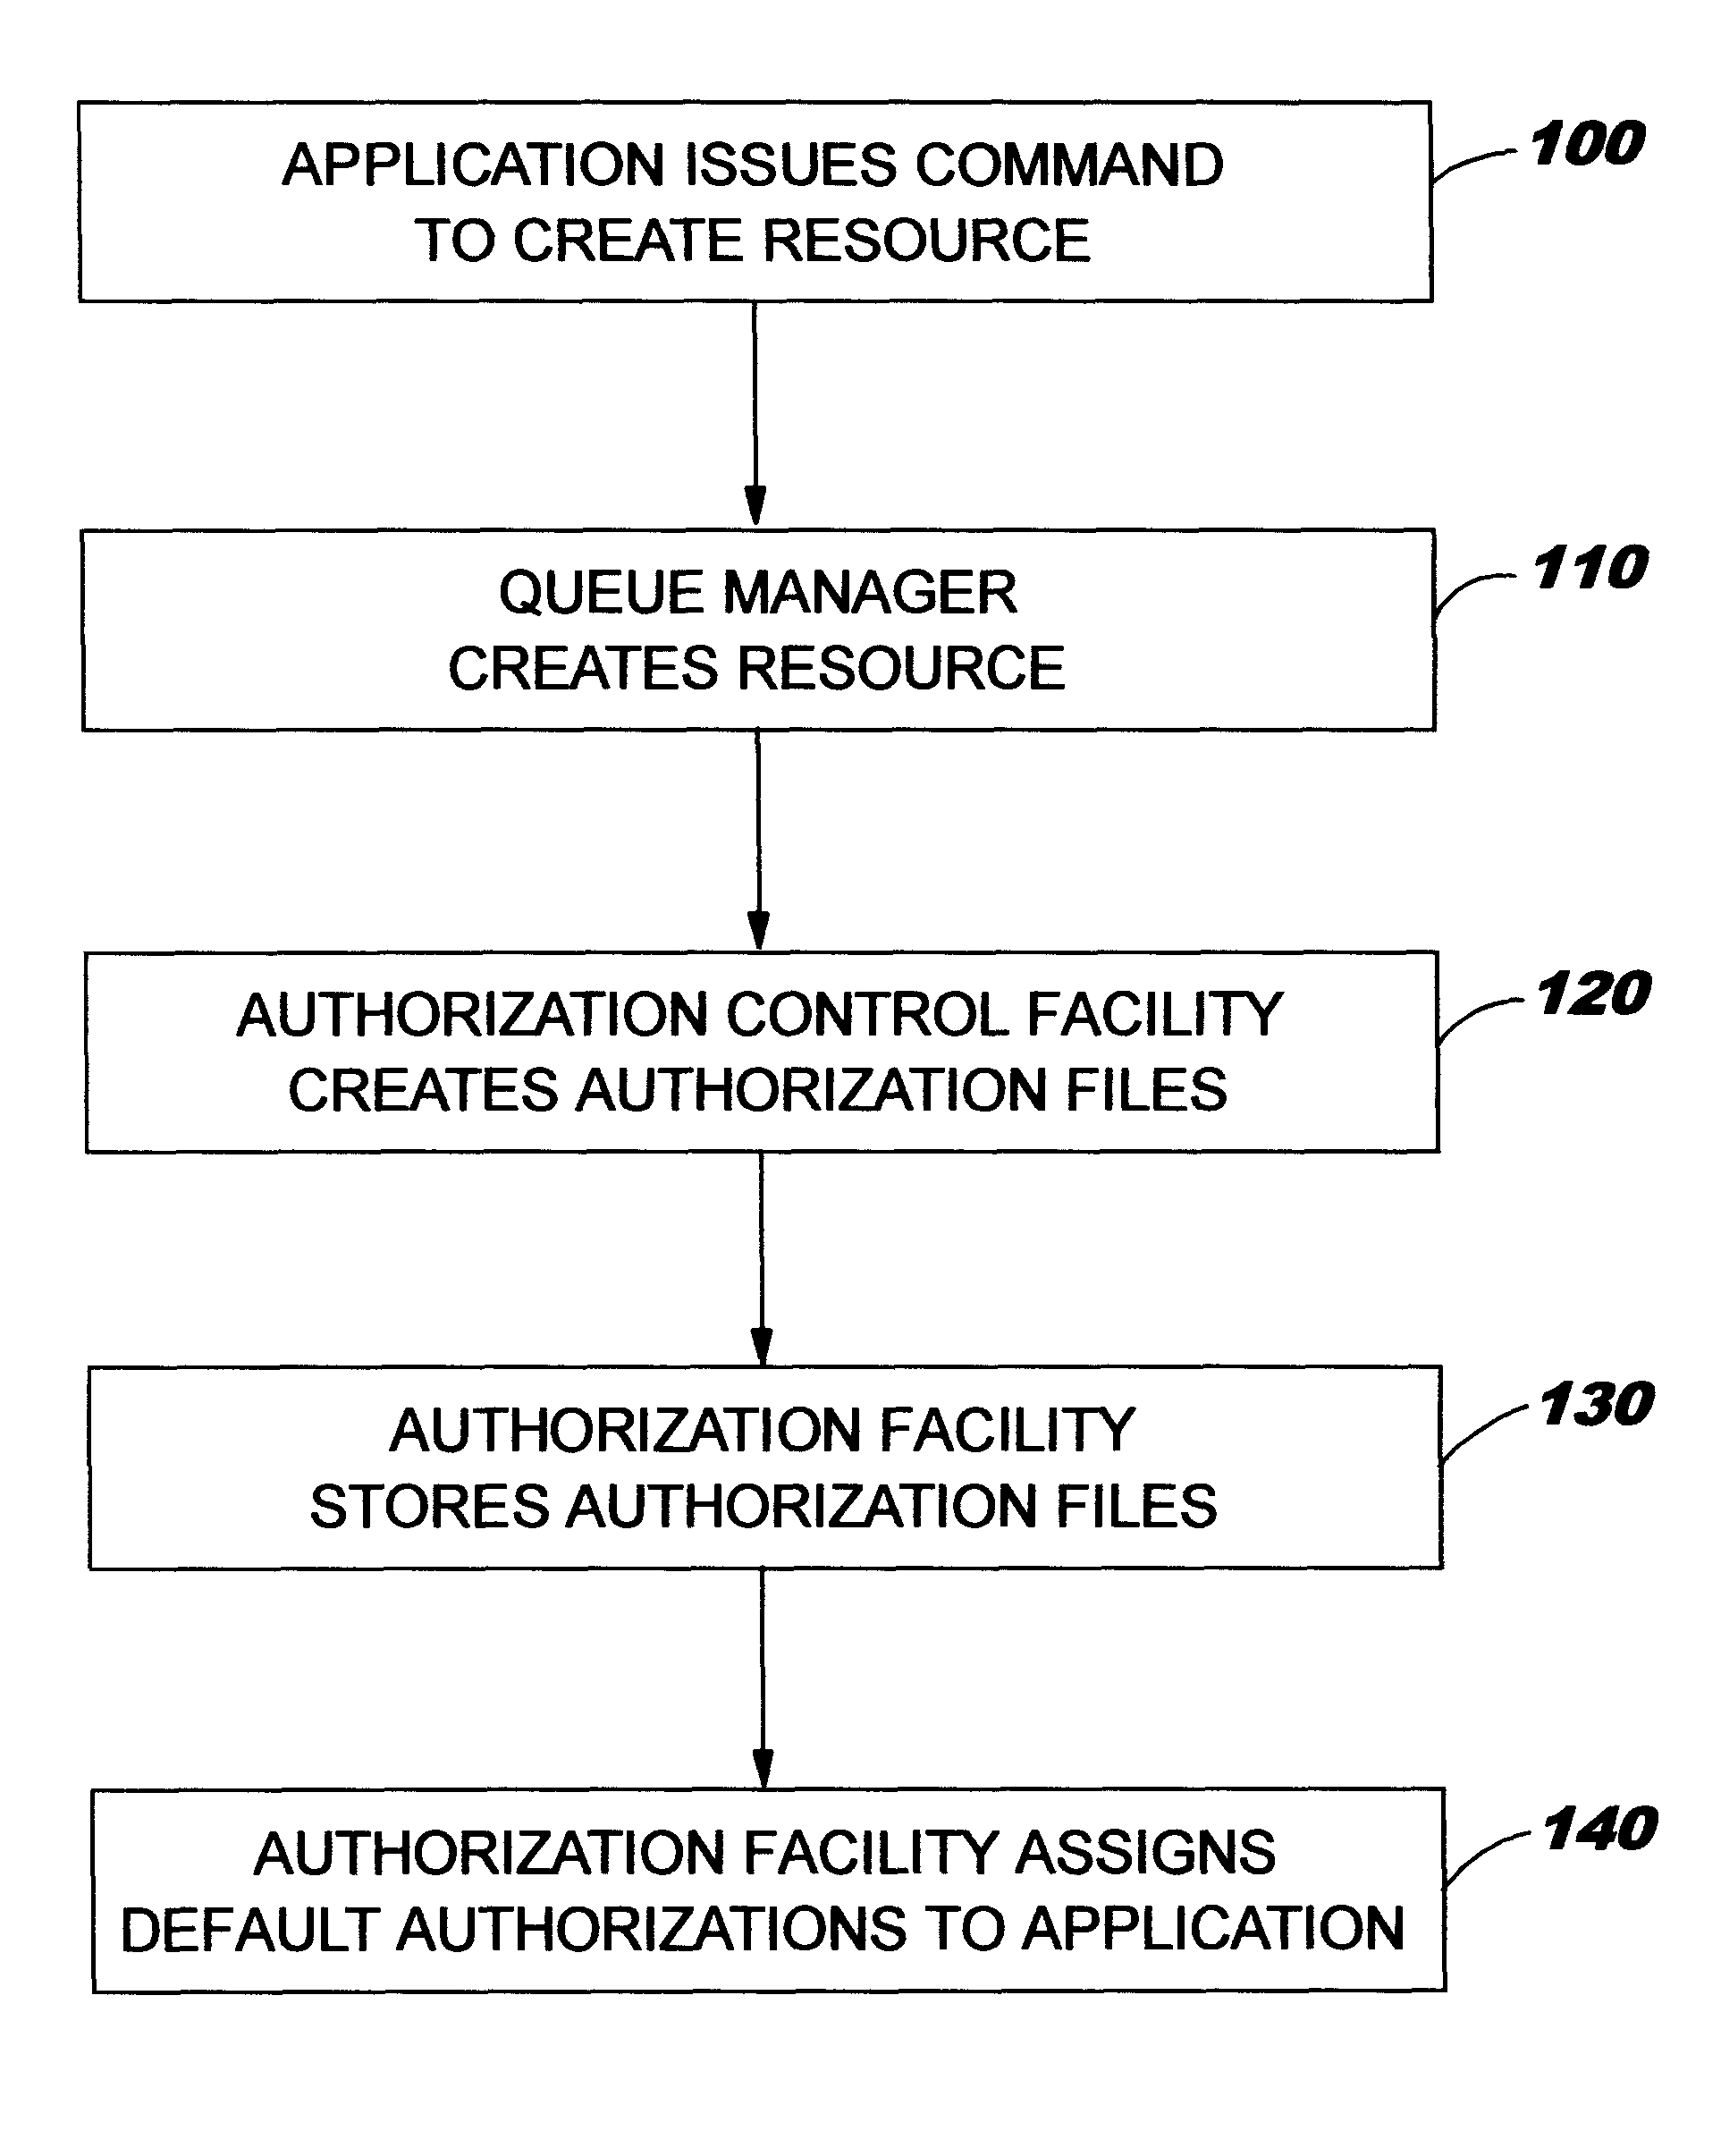 Enhanced security for computer system resources with a resource access authorization control facility that creates files and provides increased granularity of resource permission